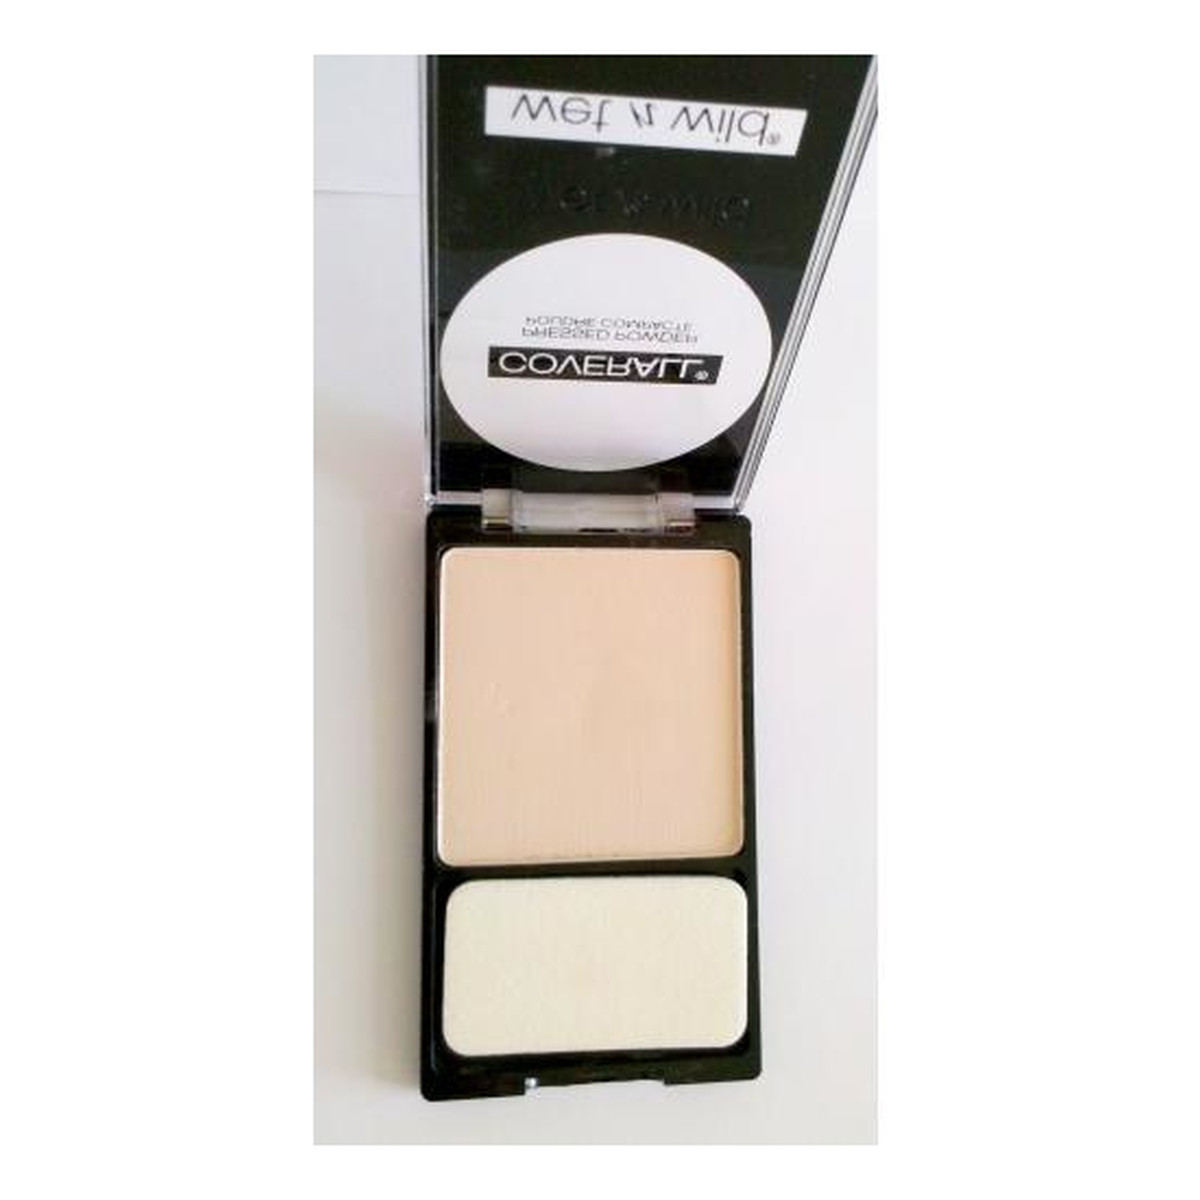 Wet n Wild PUDER COVER ALL 7g